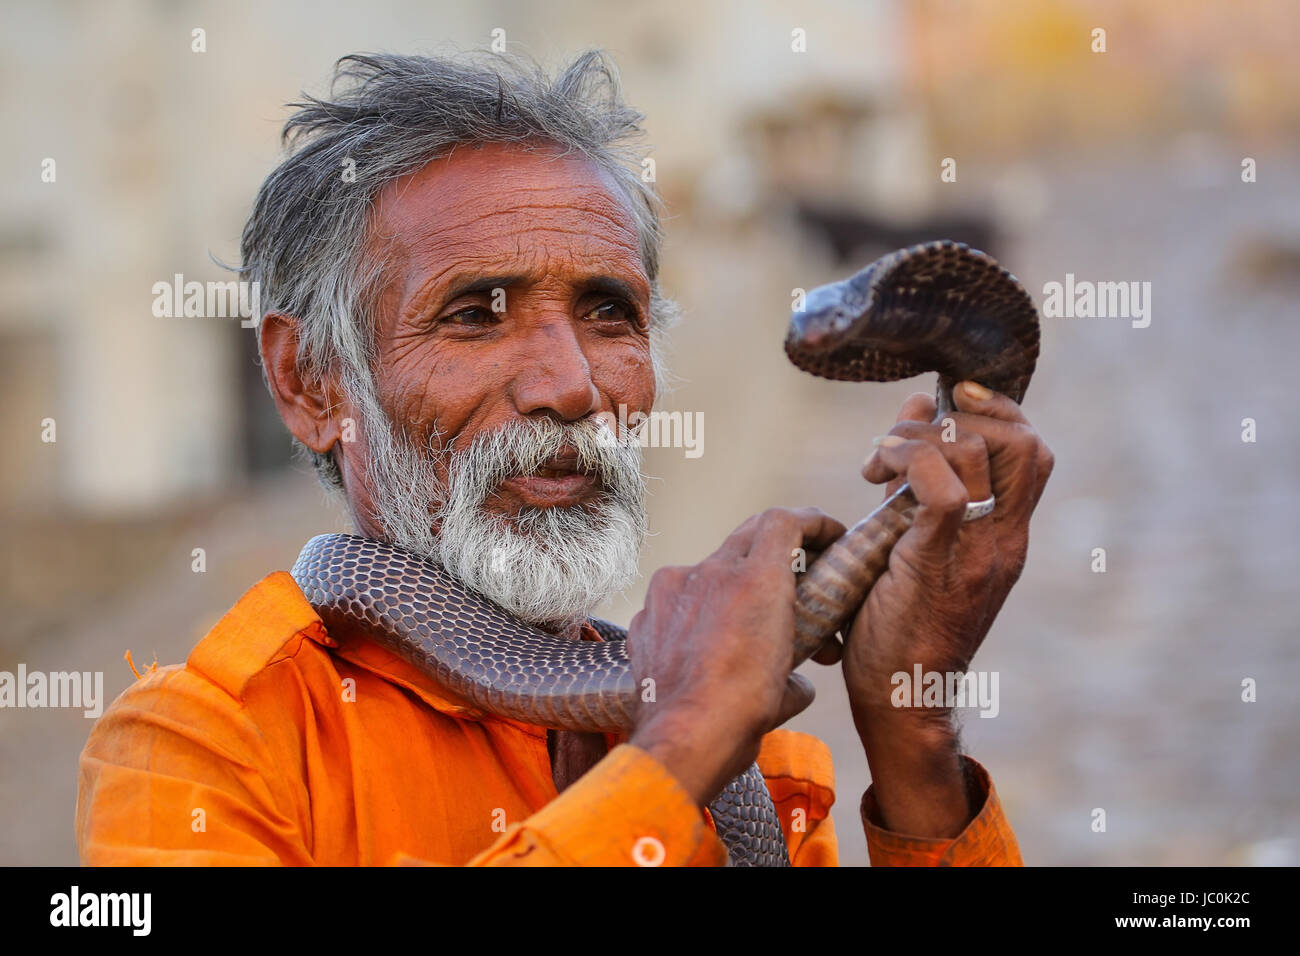 Local snake charmer holding Indian cobra in the street of Jaipur, India. Jaipur is the capital and largest city of the Indian state of Rajasthan. Stock Photo